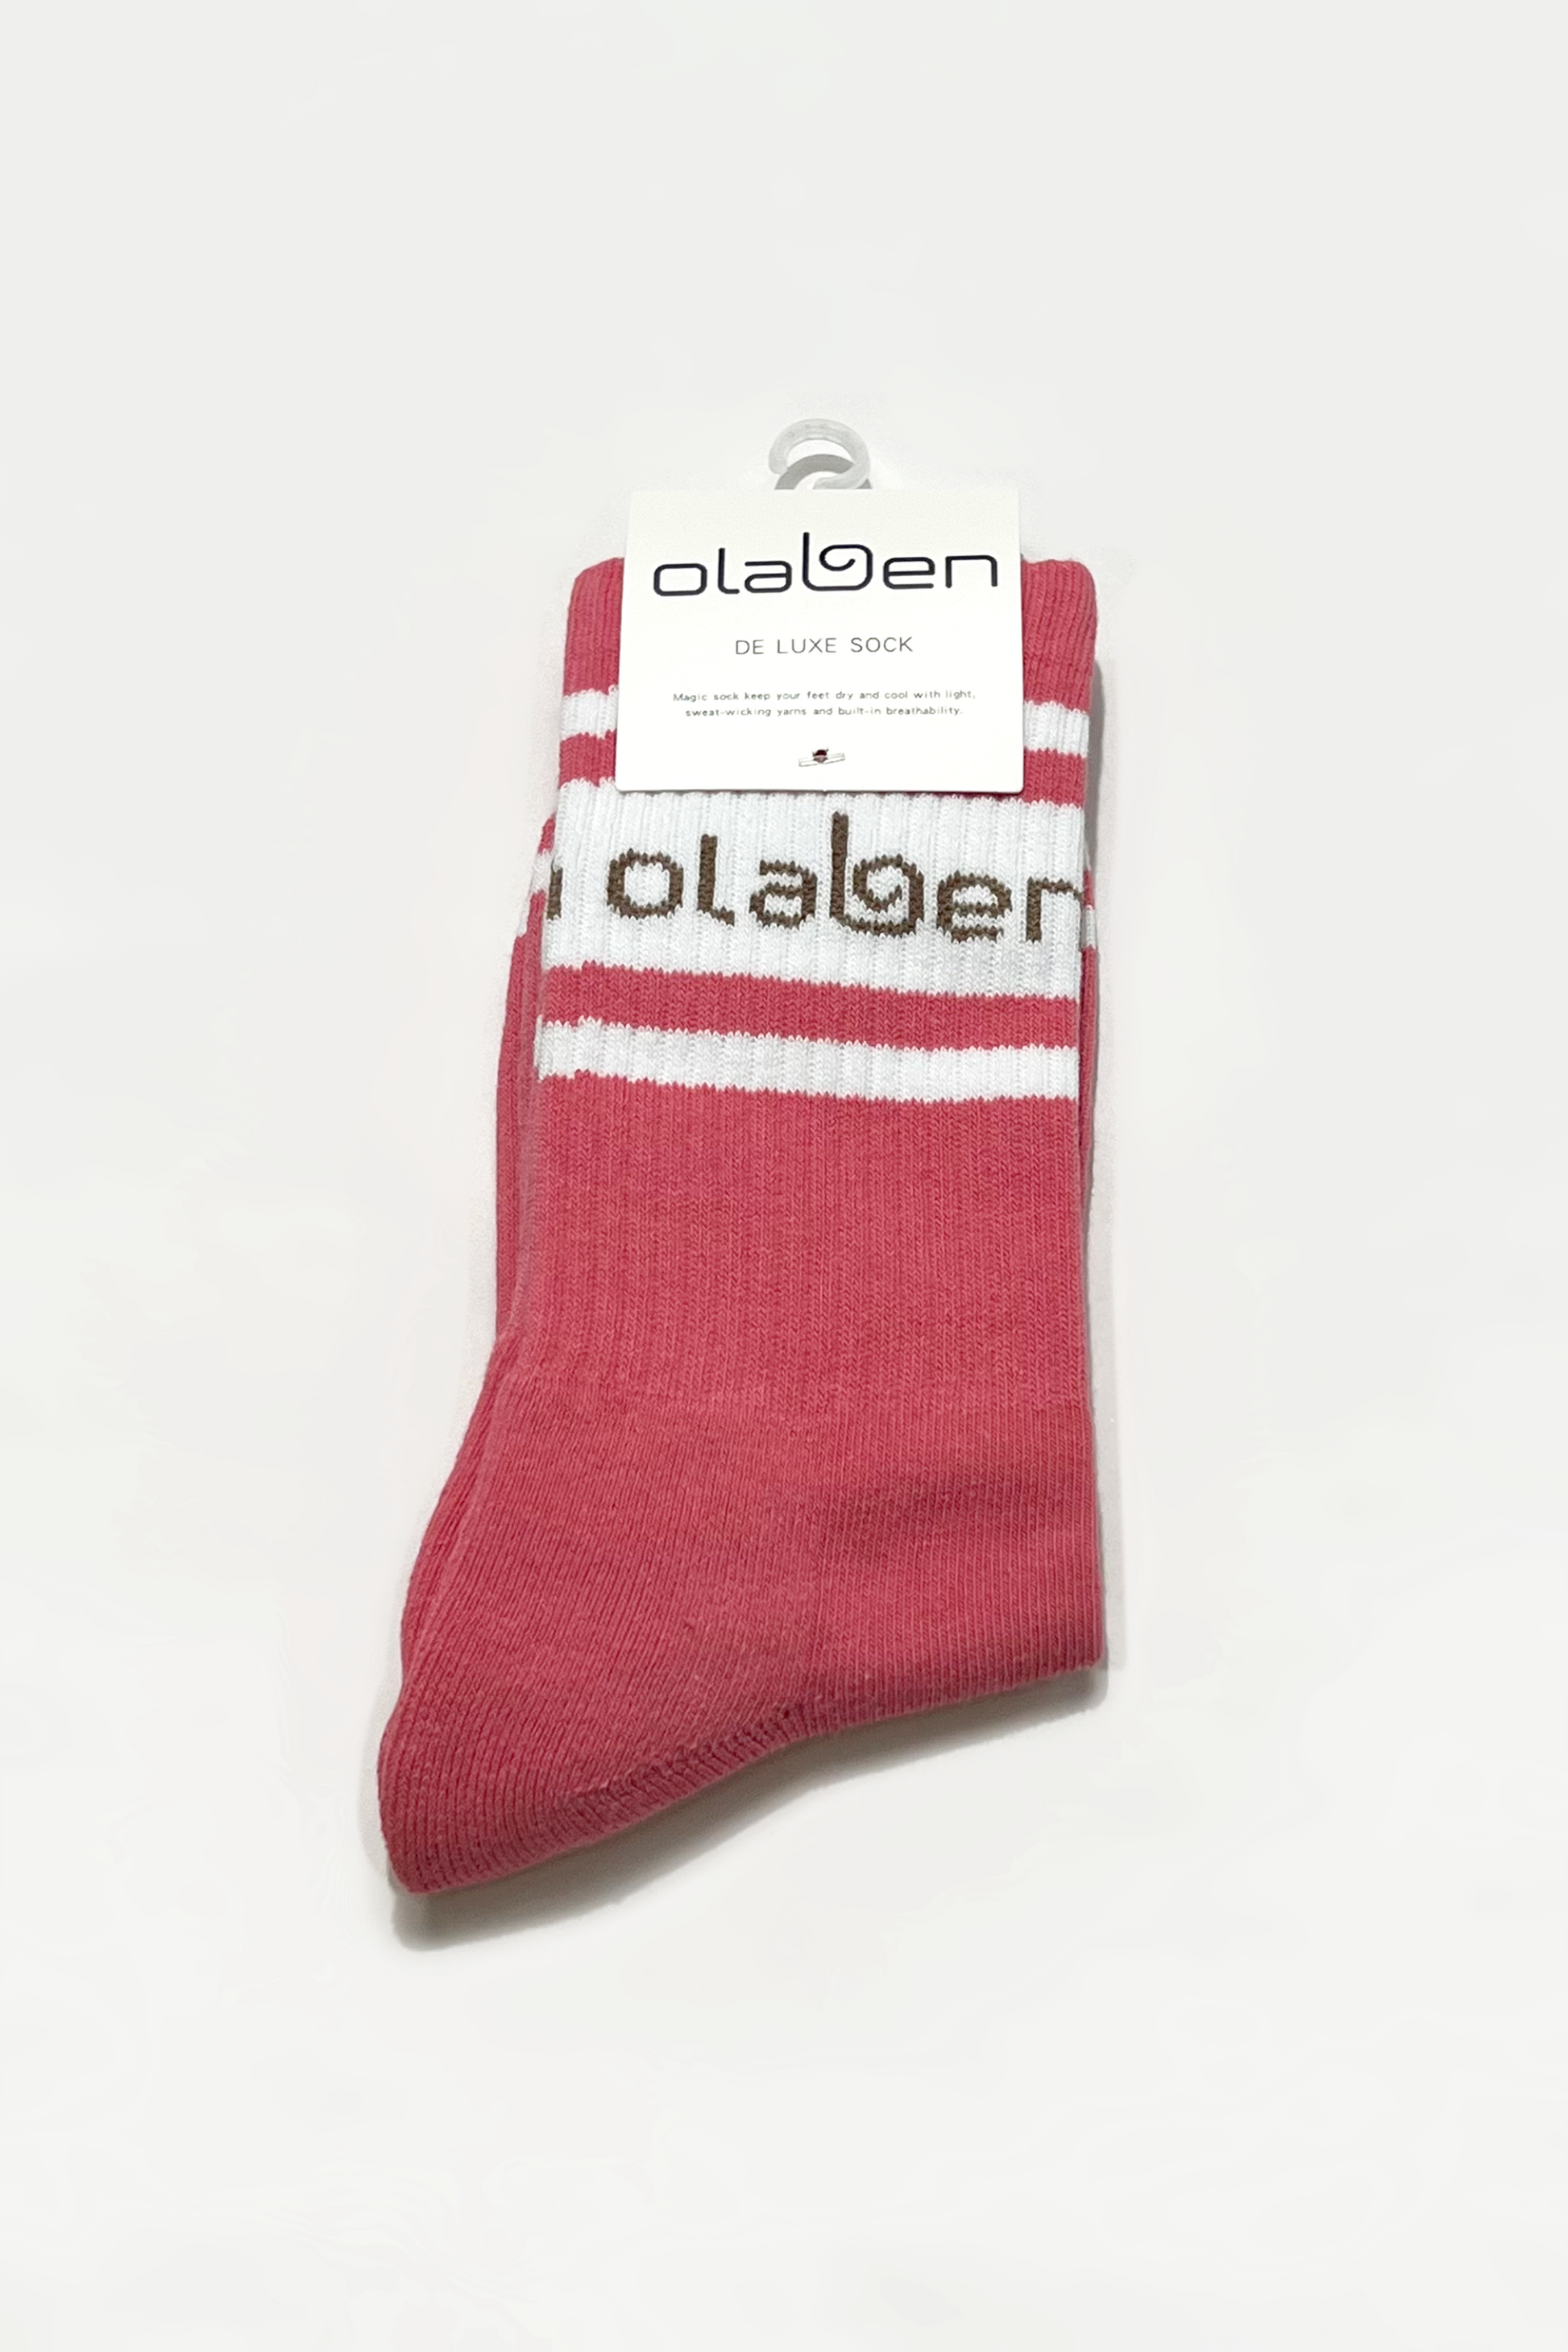 Colorful assortment of cozy quarter socks in raspberry wine and pink shades.